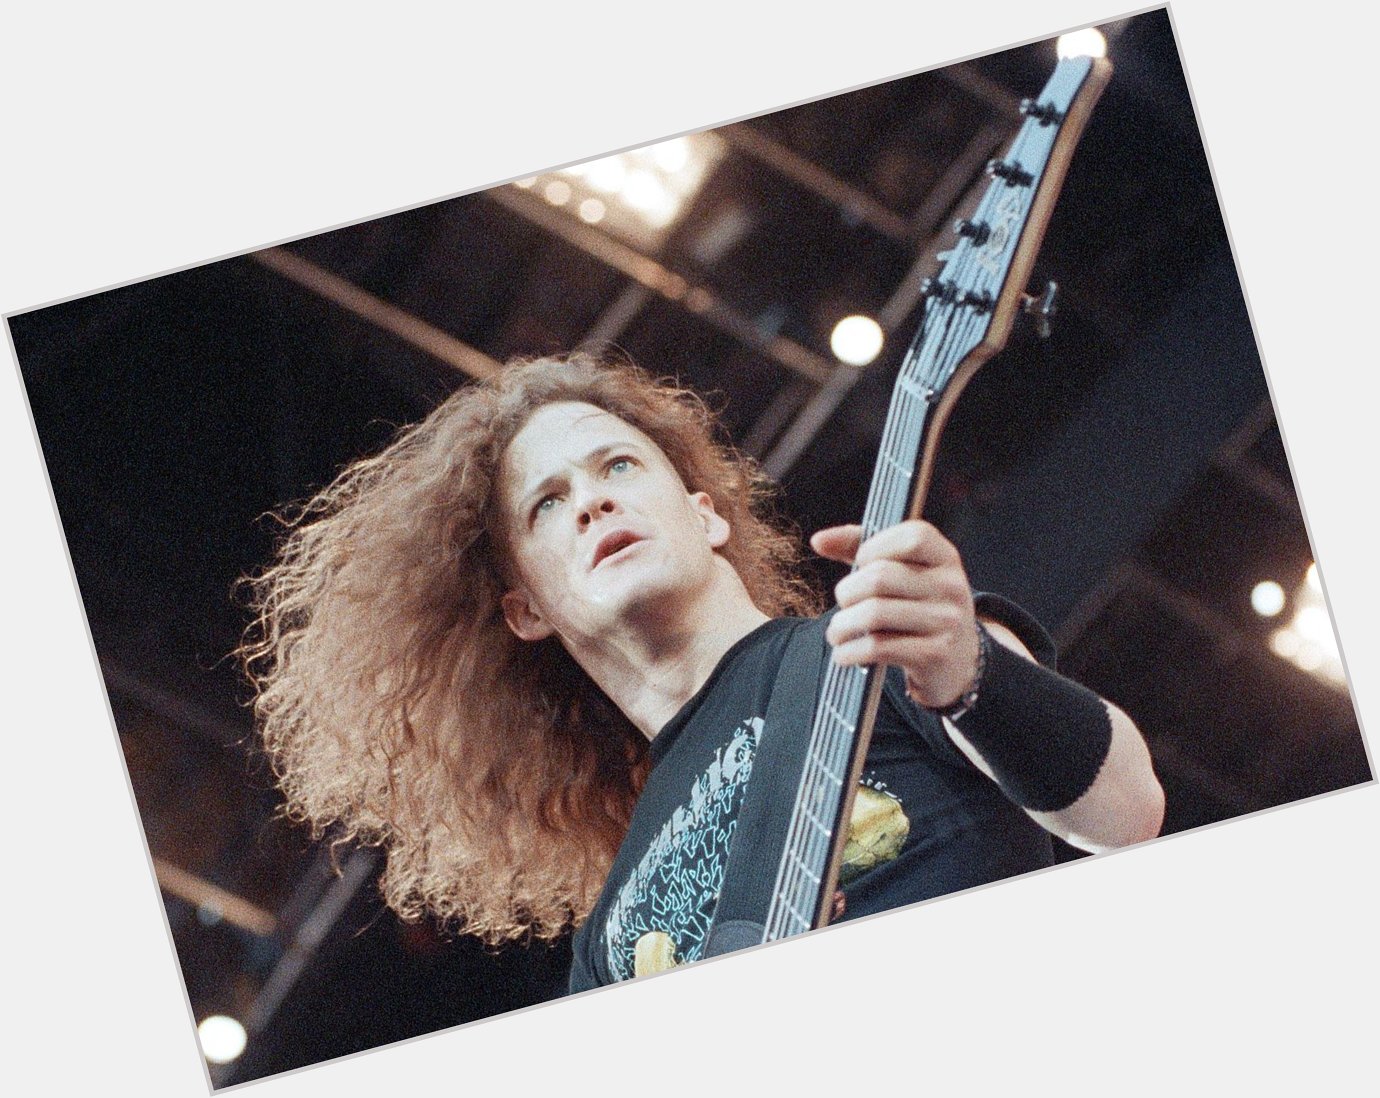 Happy birthday to Jason Newsted!

What s your favorite track Jason played on? 